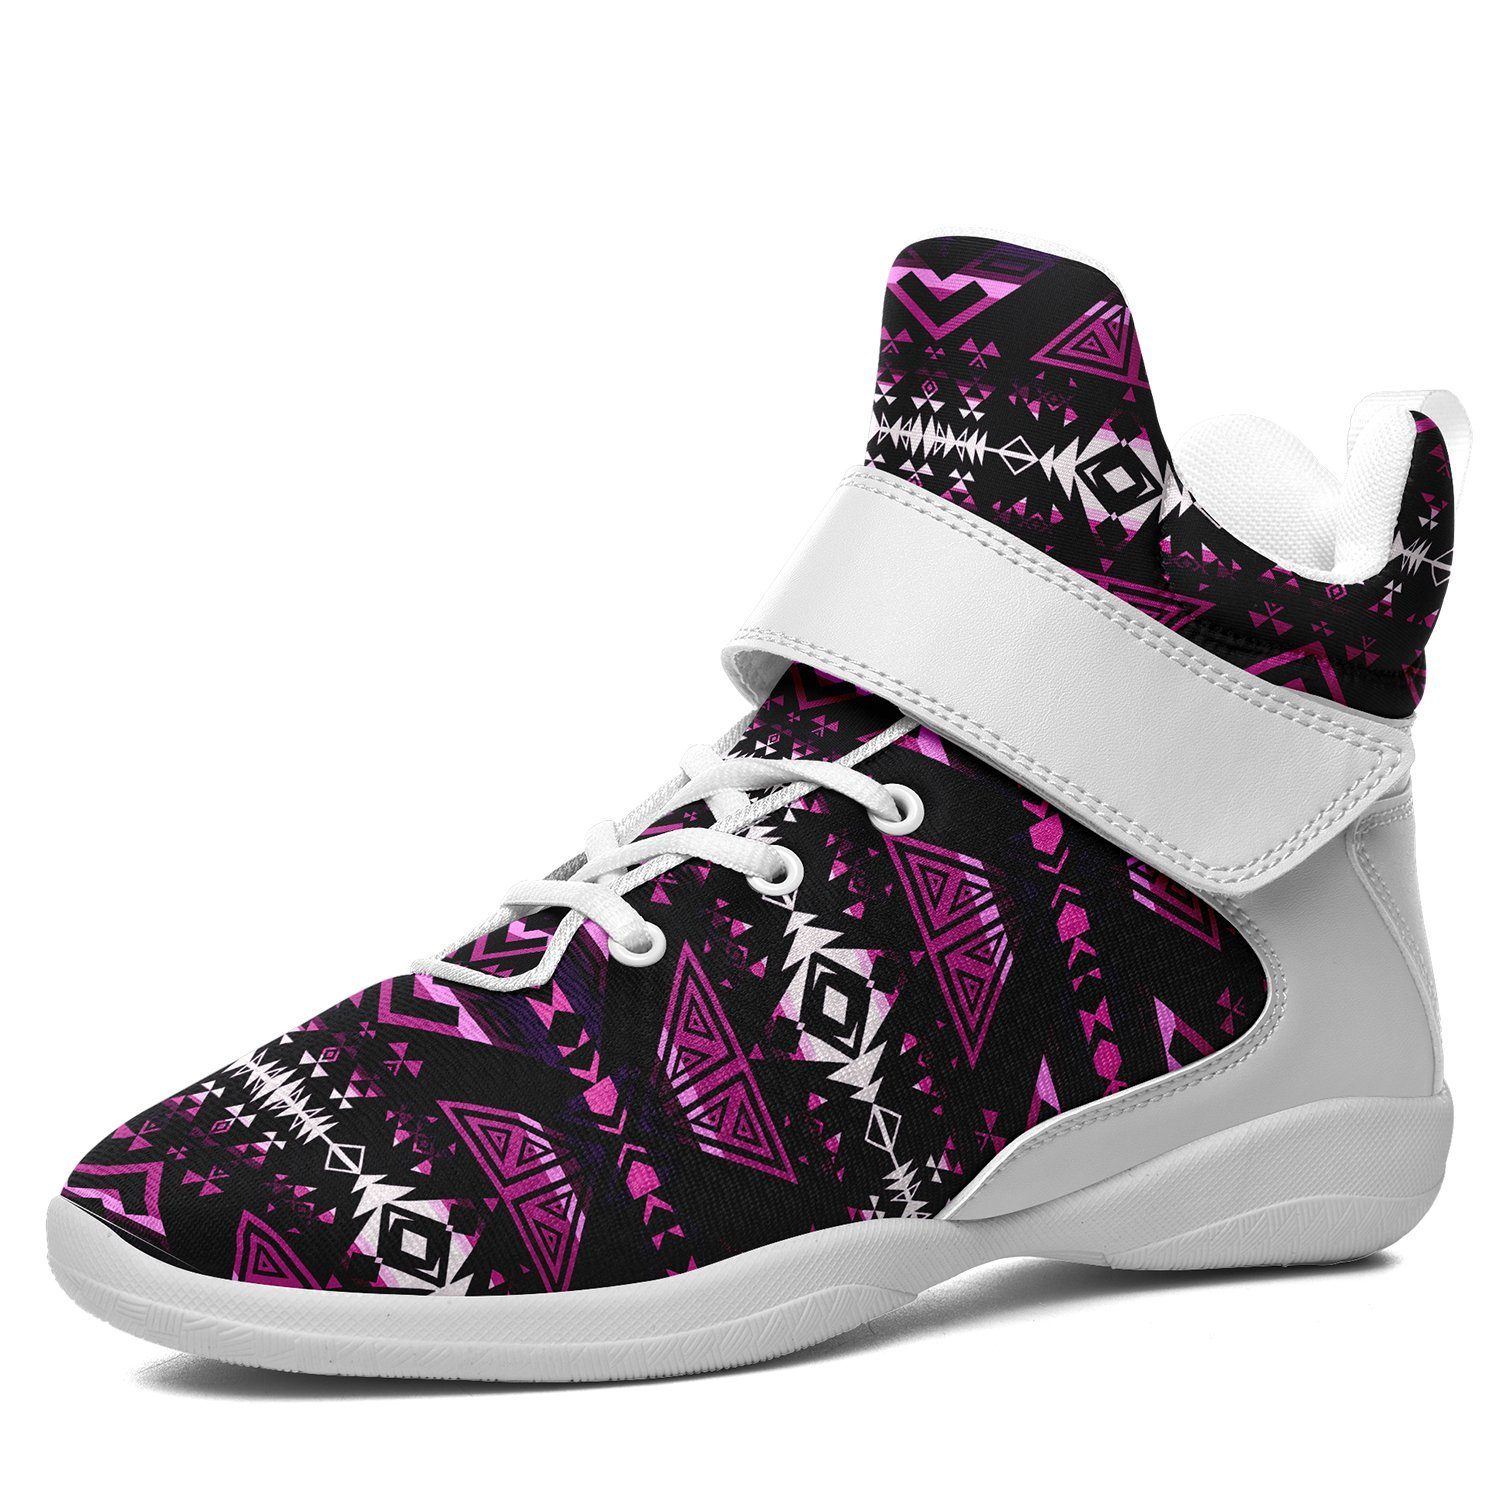 Upstream Expedition Moonlight Shadows Kid's Ipottaa Basketball / Sport High Top Shoes 49 Dzine US Child 12.5 / EUR 30 White Sole with White Strap 